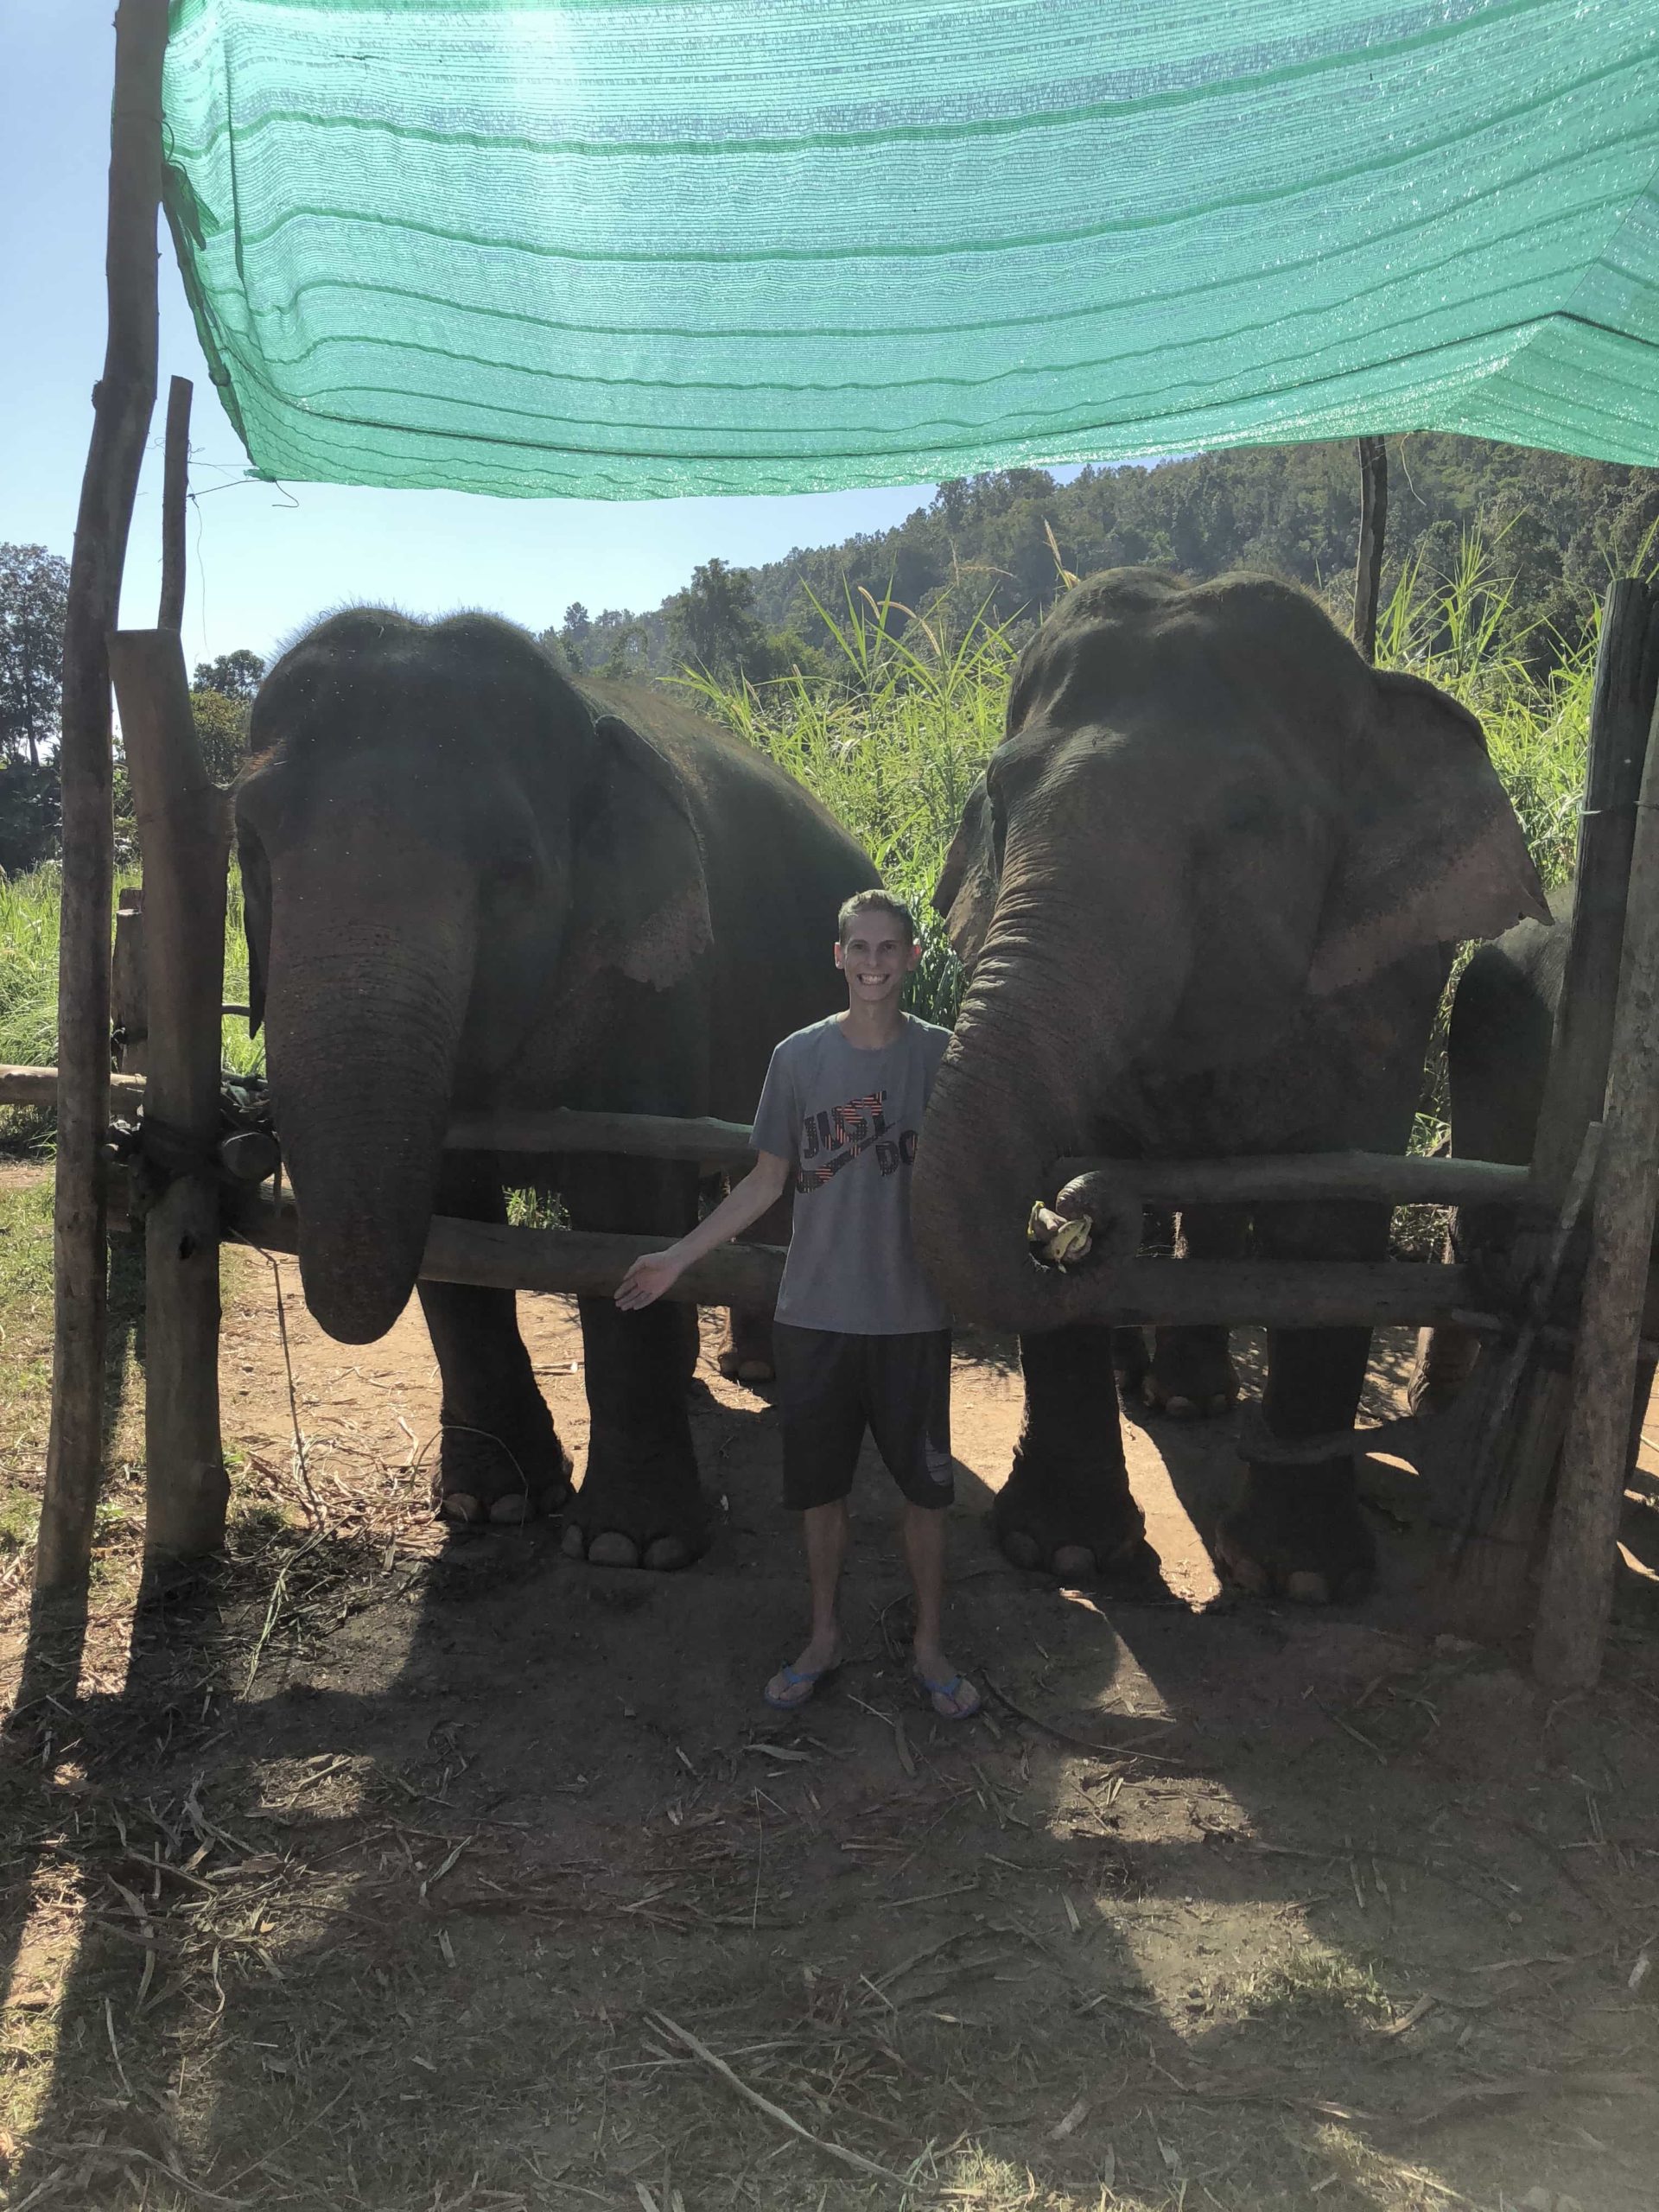 Hike with elephants in Thailand entrance